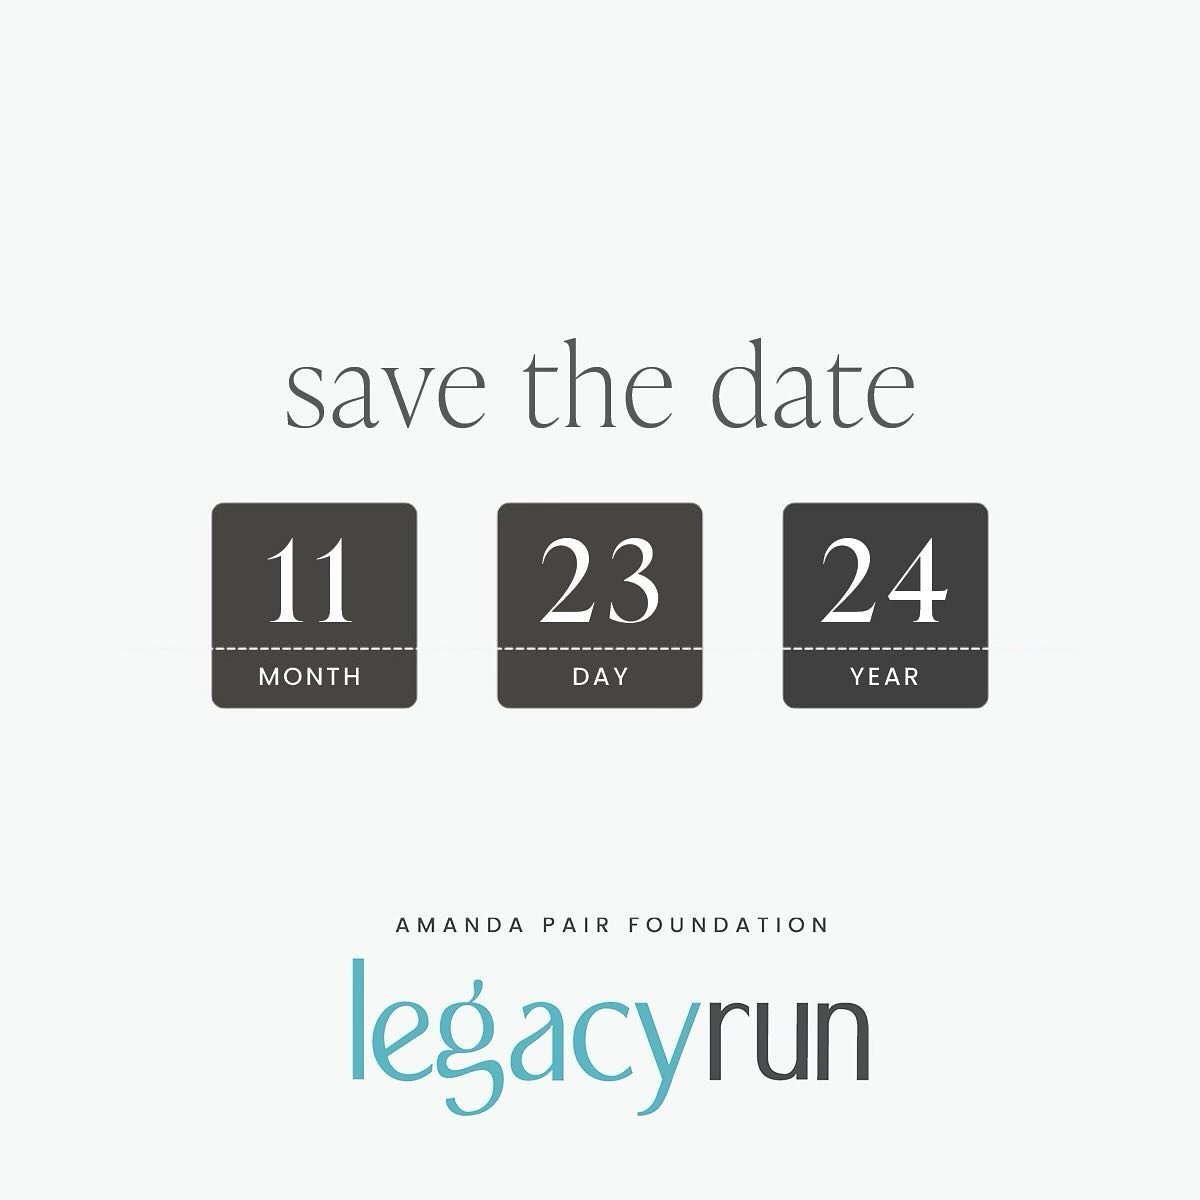 Our next large scale event will be our Legacy Run! Pencil us in for November 23rd so you can be part of overcoming cancer! Walkers and runners of all ages are encouraged to participate in this family-friendly event.

#amandapairfoundation #apf #legac